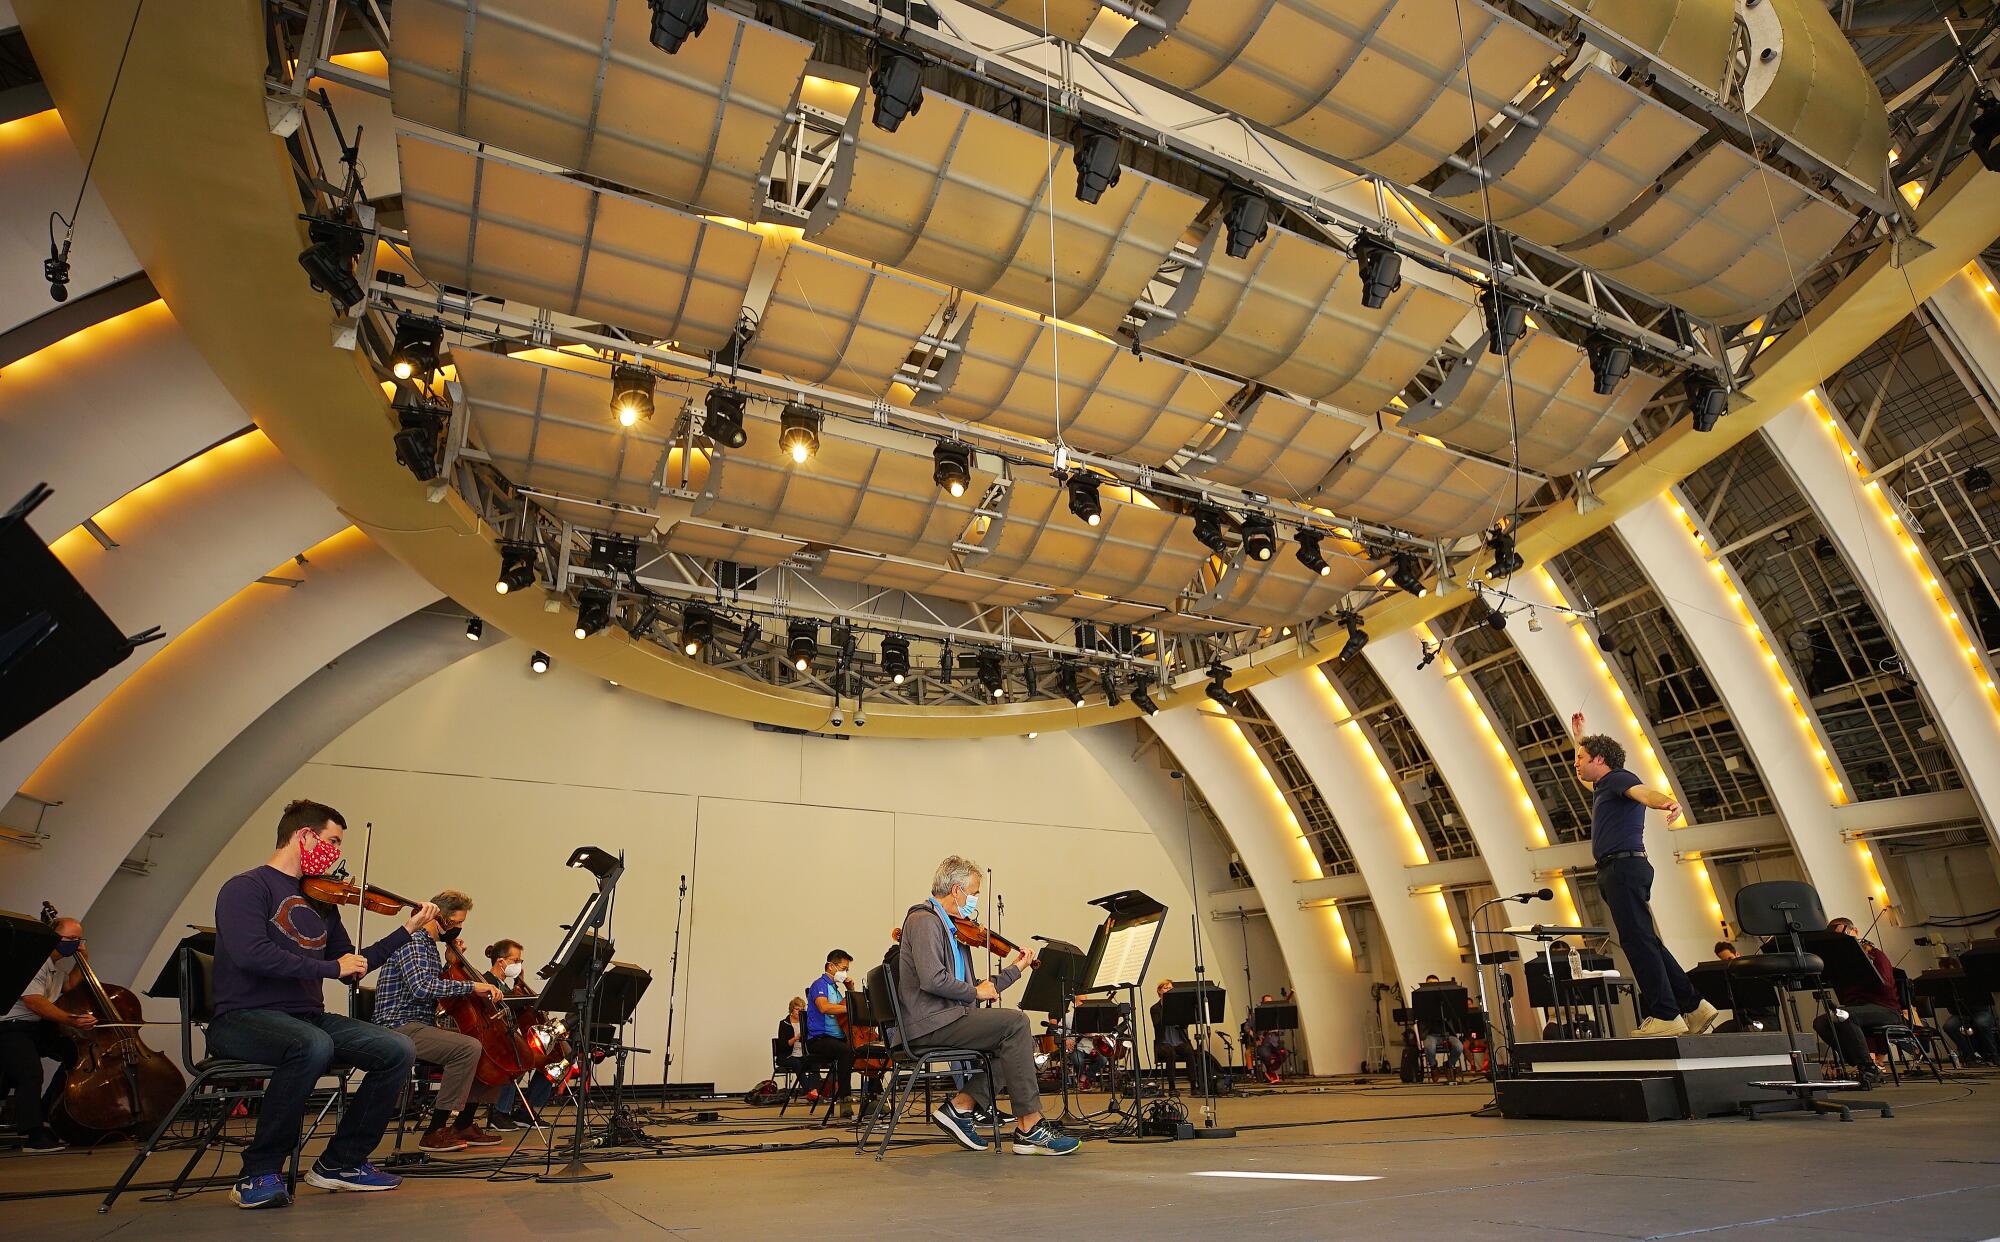 A wide view of rehearsal